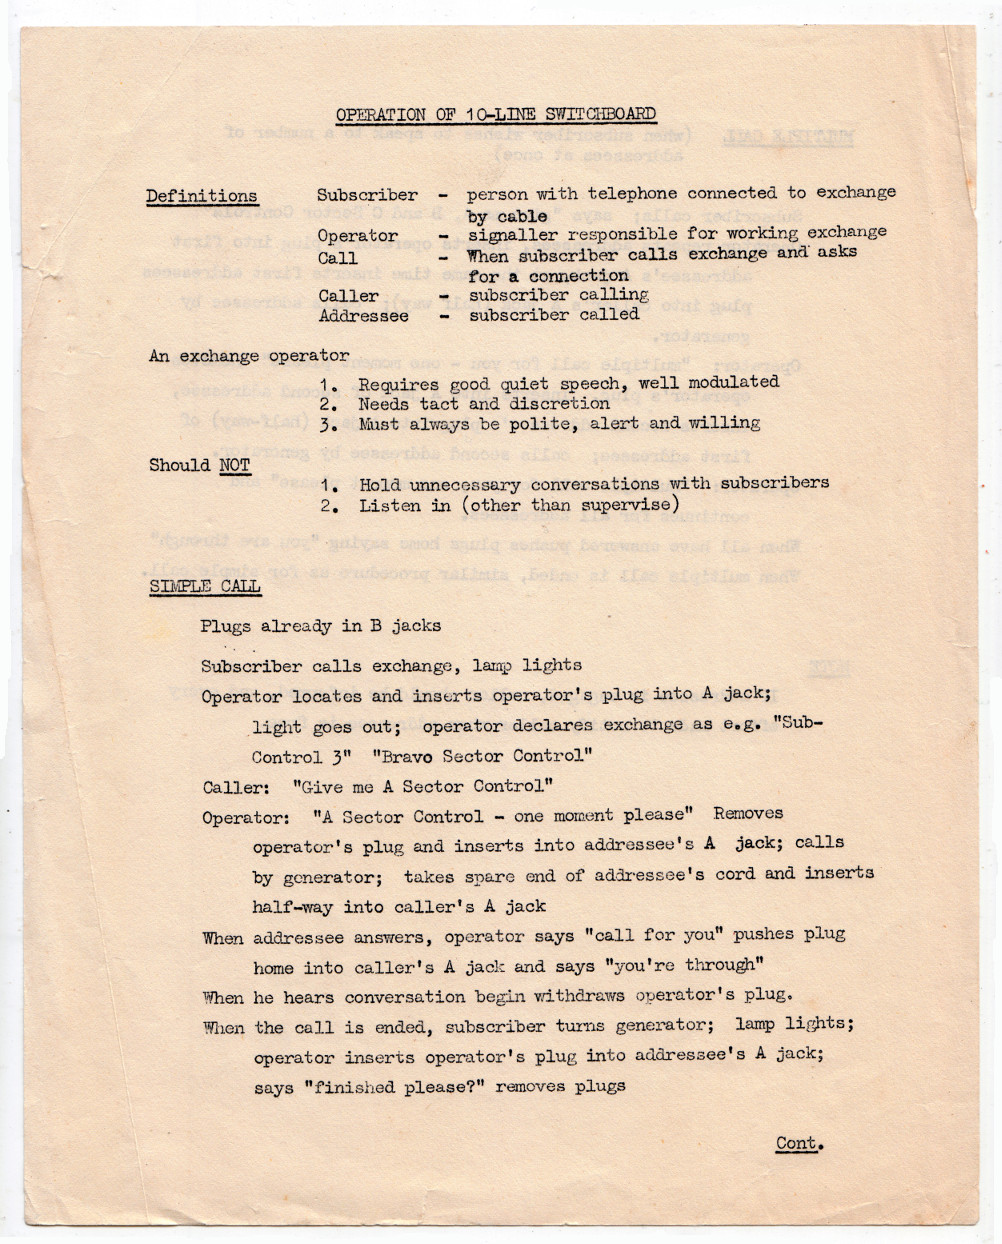 Operating instructions for 10-line telephone switchboard, page 1